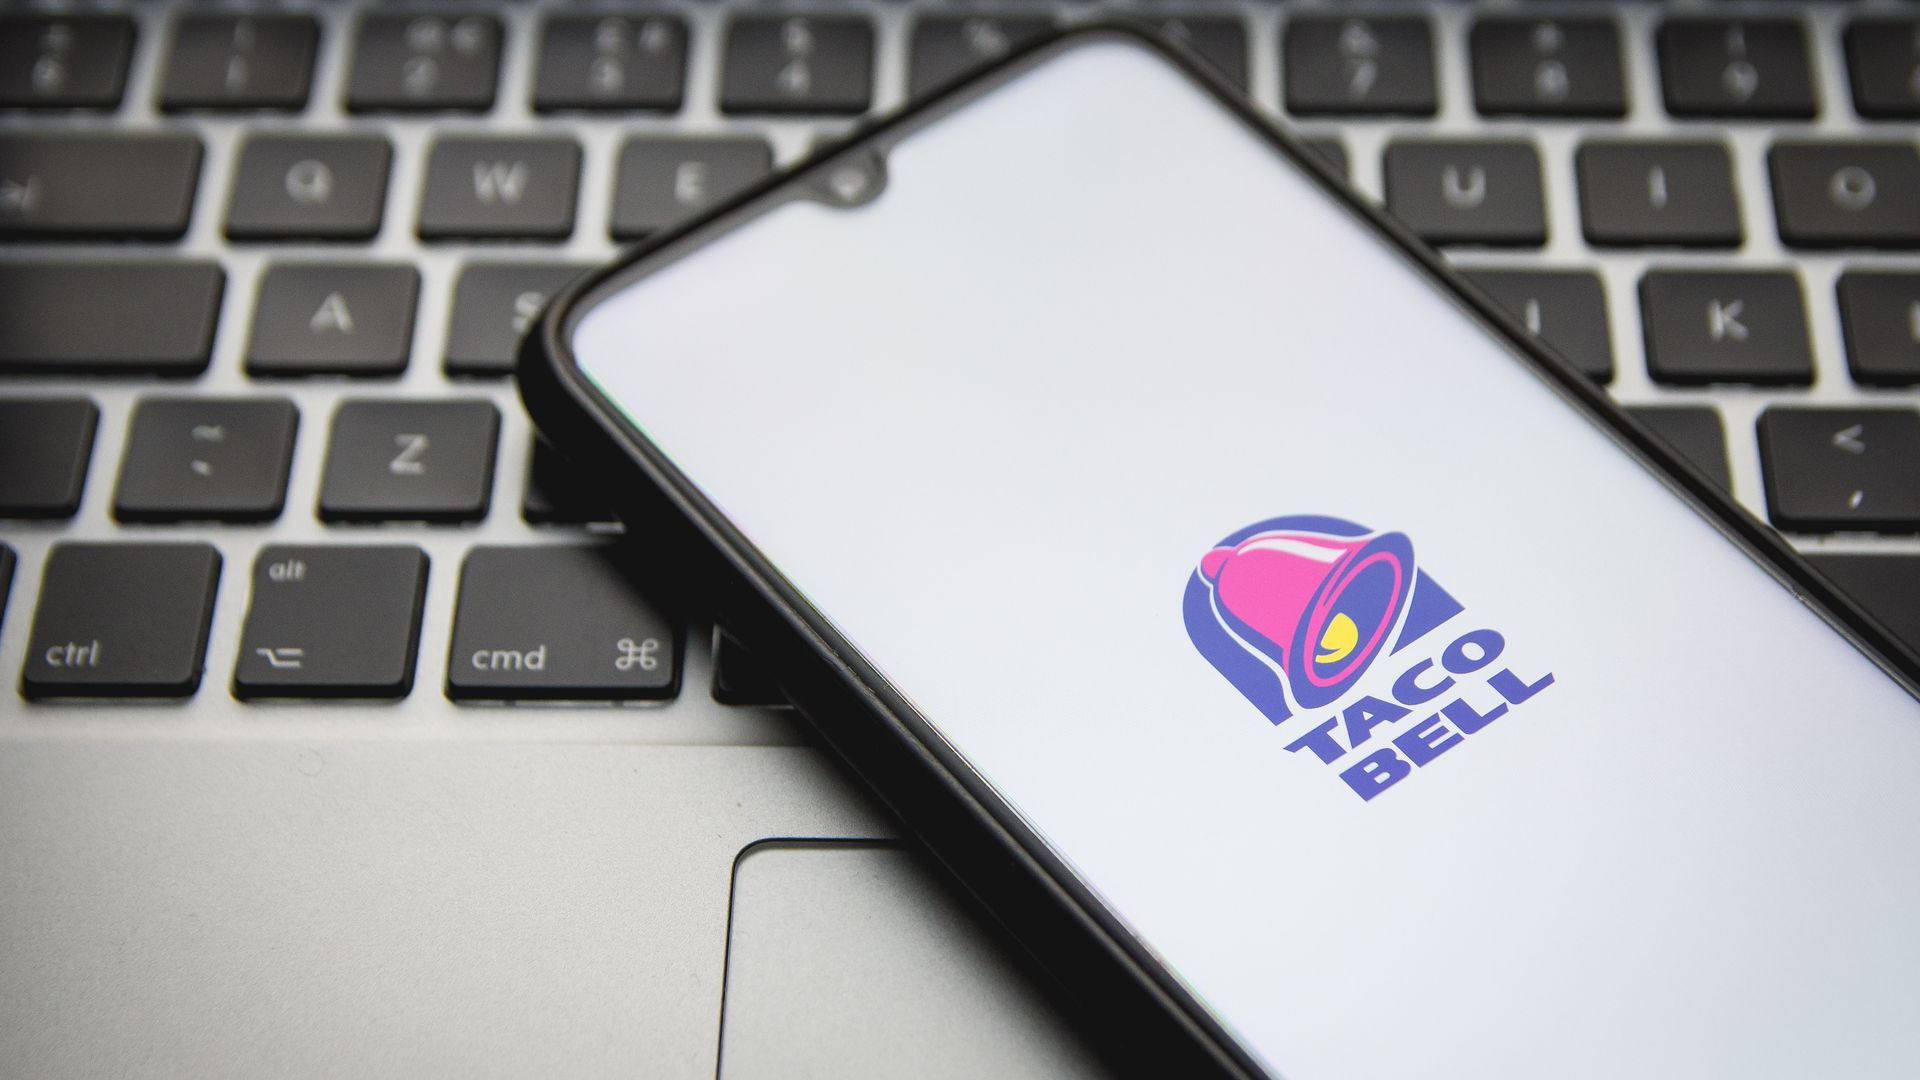 Photo of a phone that shows the Taco Bell logo against a white background. The phone is lying on a black keyboard.